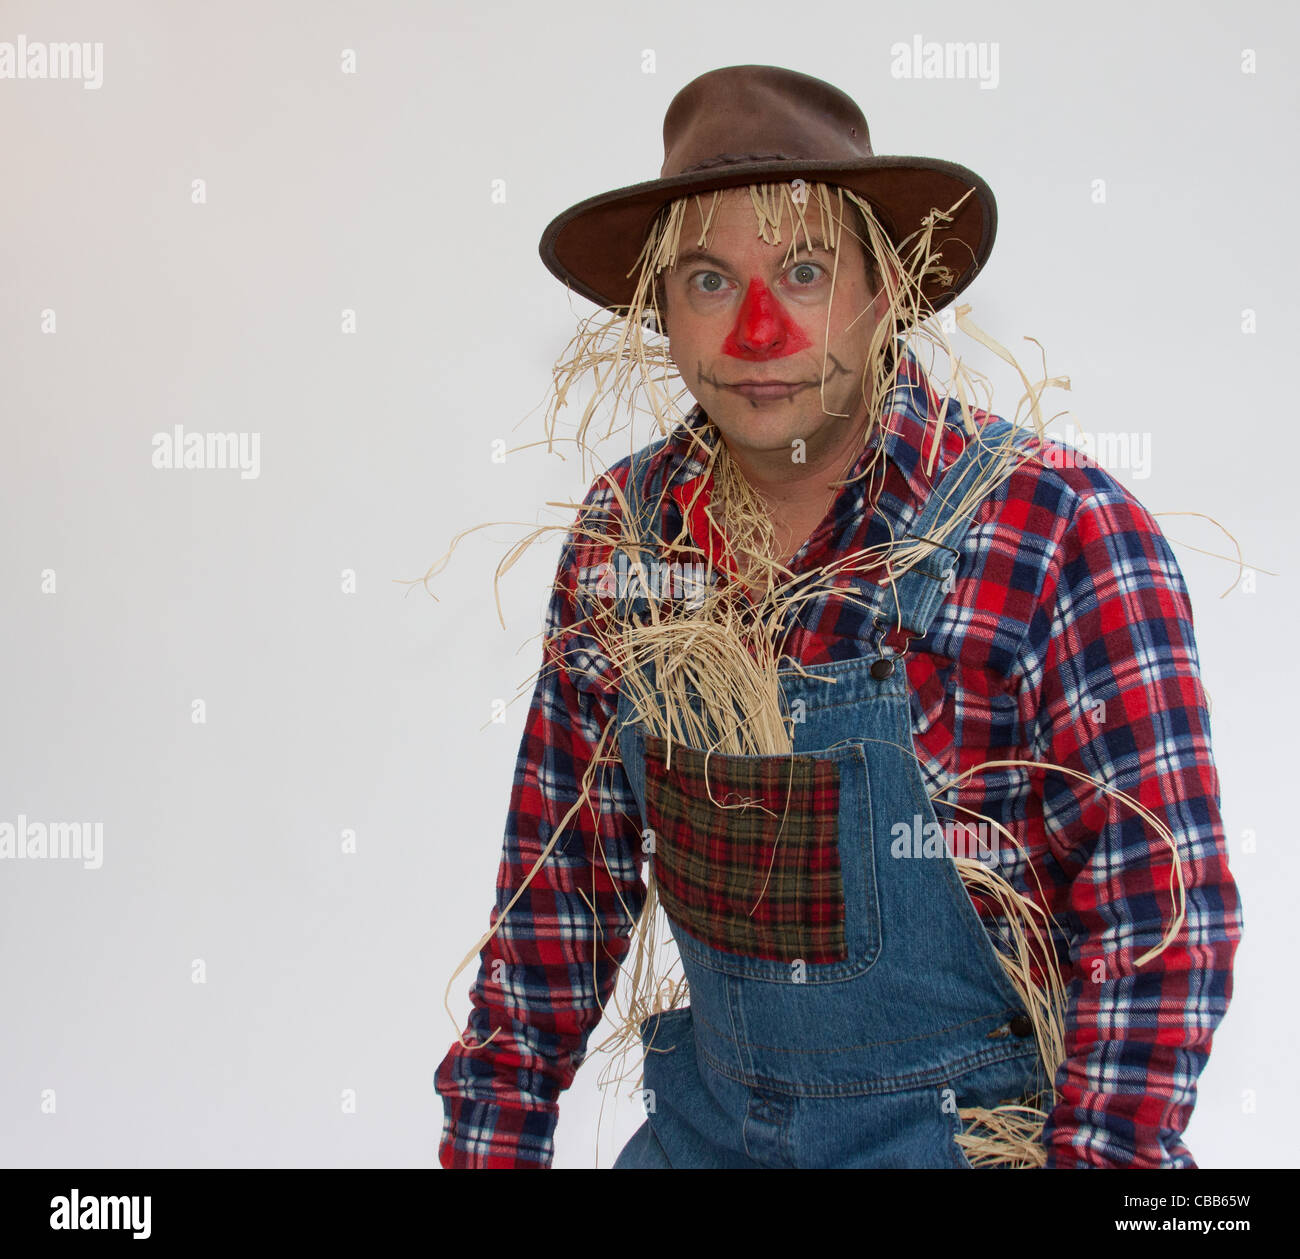 Human Scarecrow making faces or trying to scare off the crows. Stock Photo